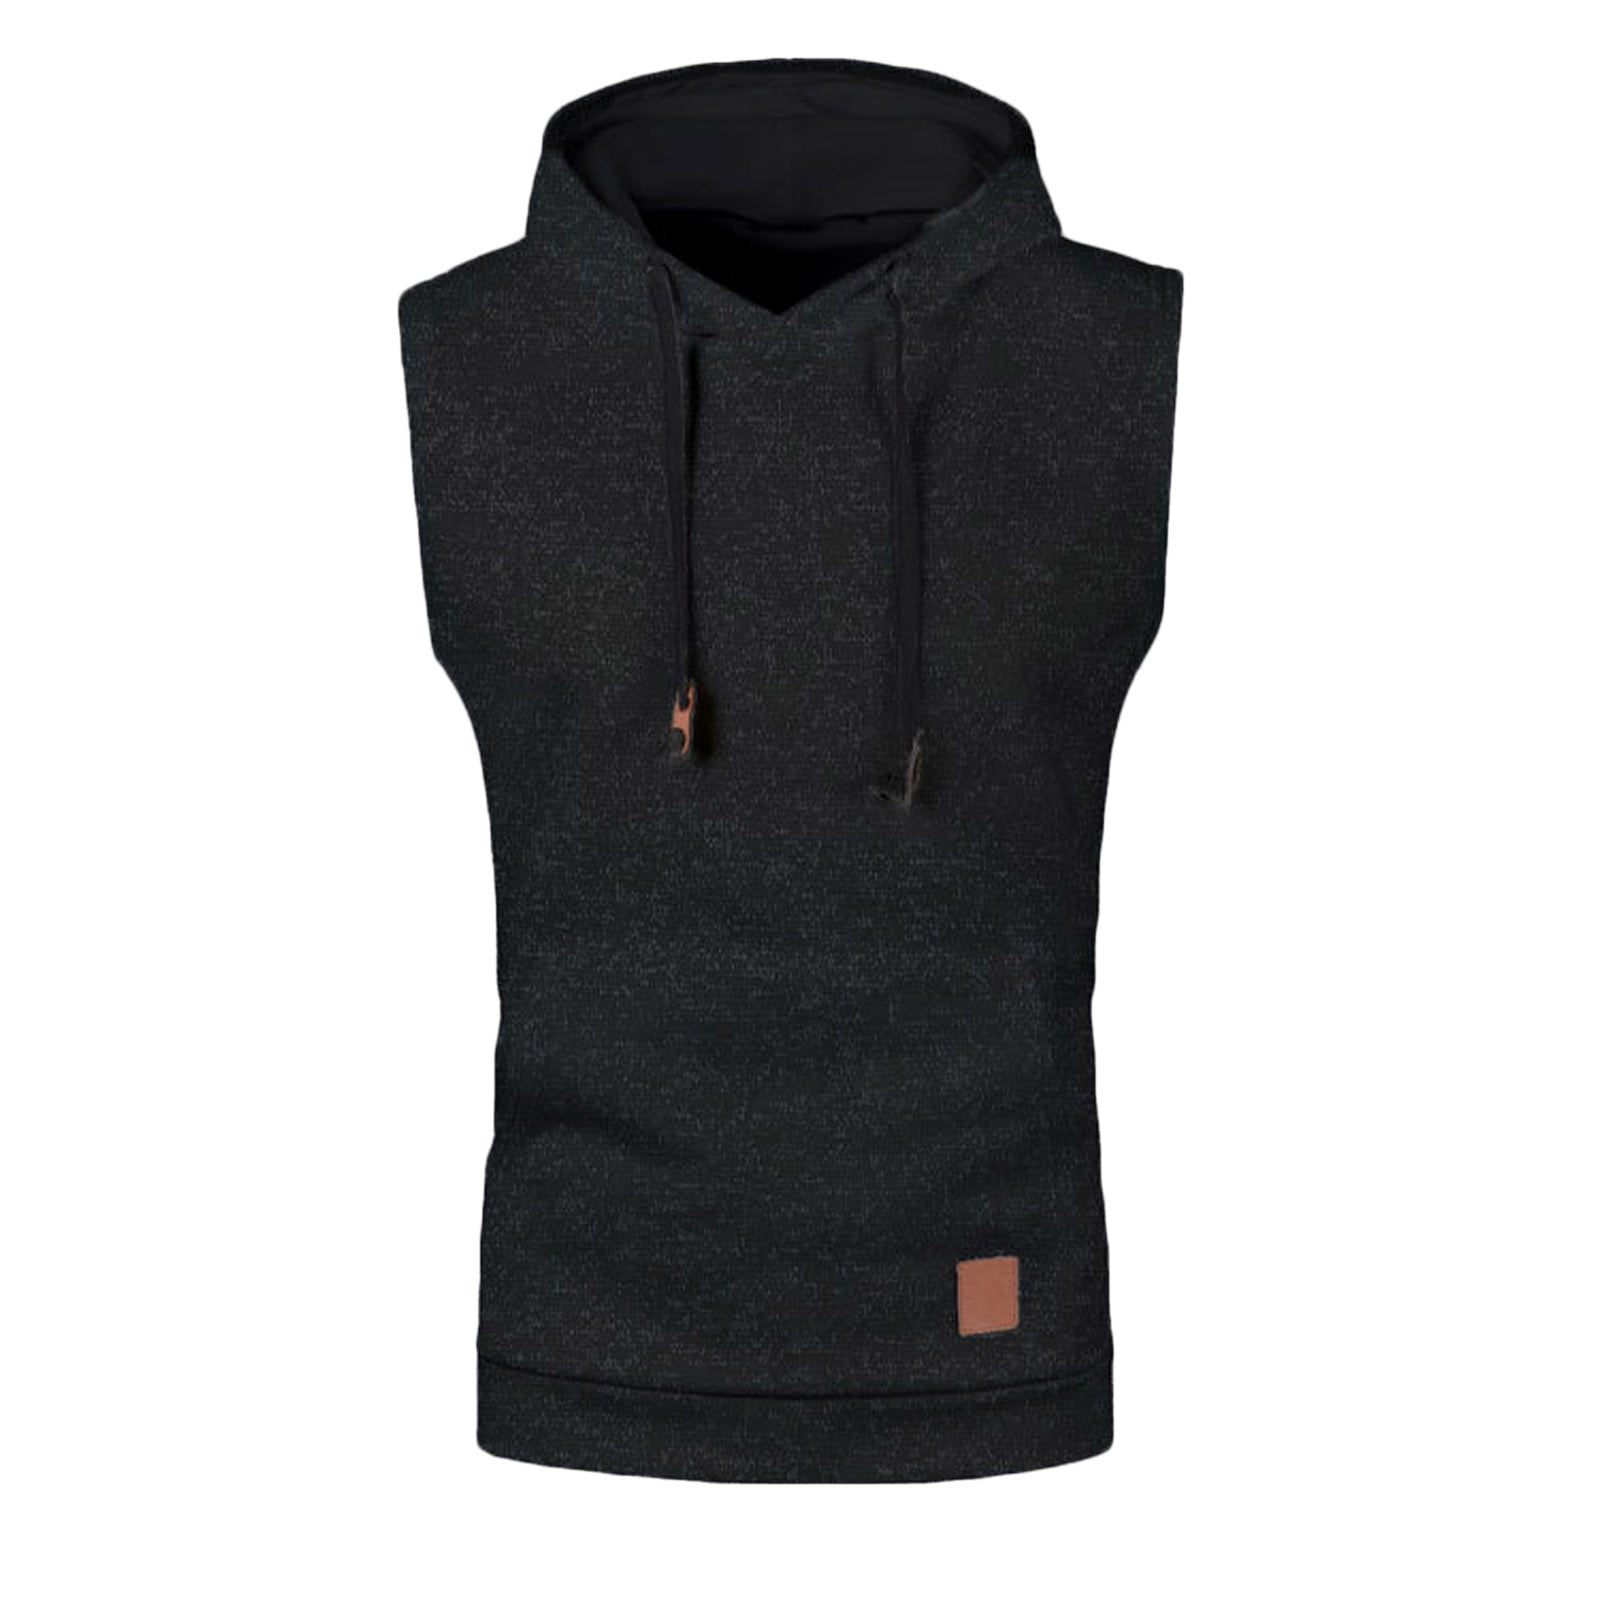 VSSSJ Men's New Knitted Waistcoats with Hooded Slim Fit Solid Color ...